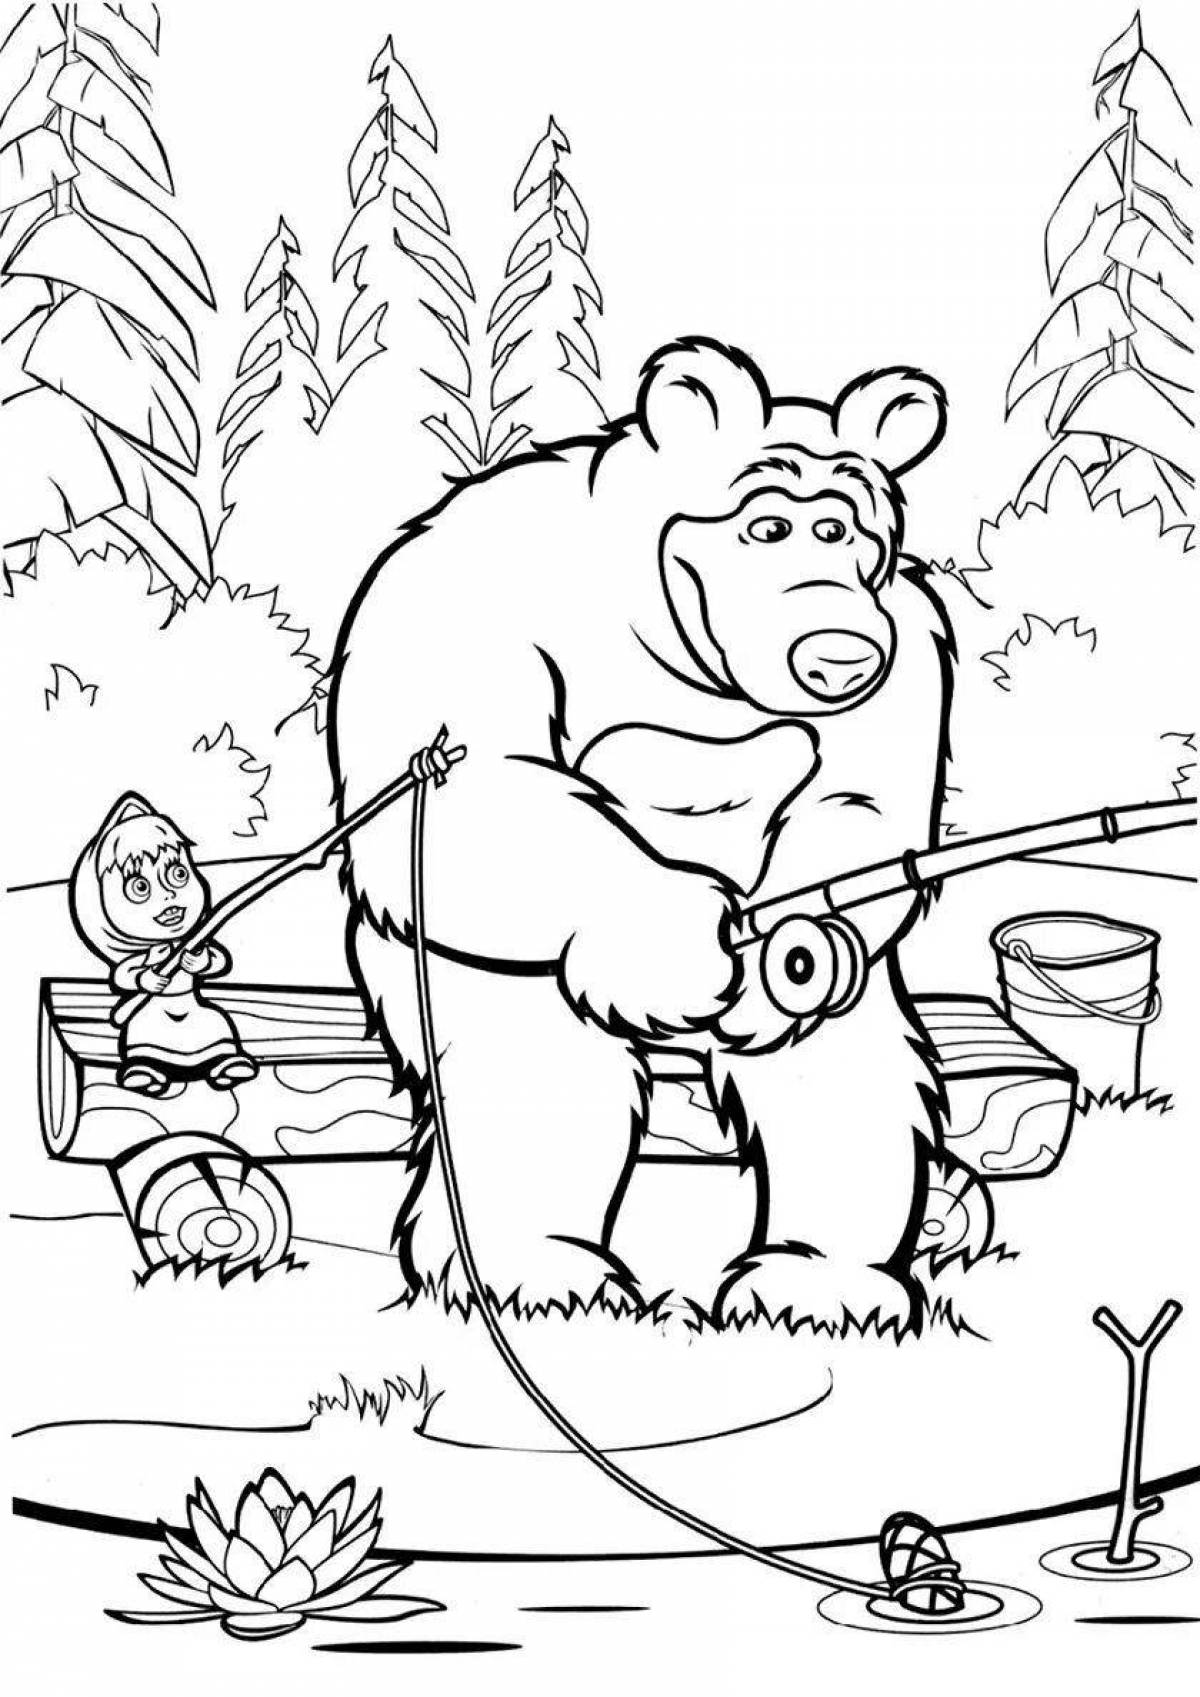 Coloring page loving teddy bear from masha and bear